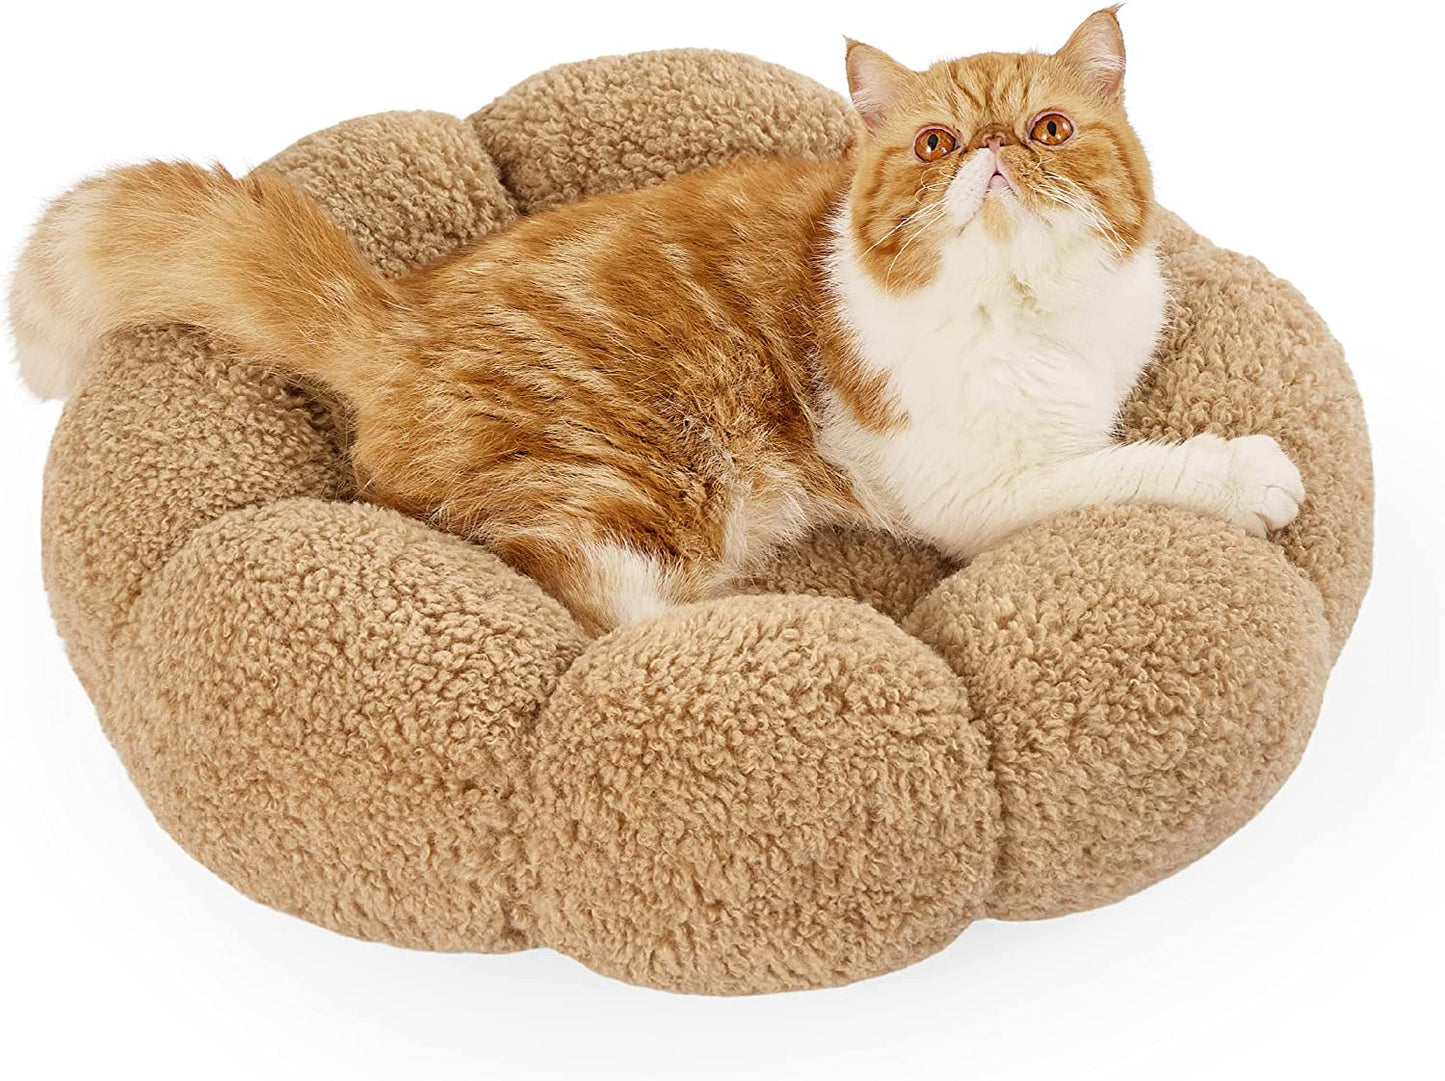 Lesure Calming Small Dog Bed - Donut Round Fluffy Puppy Bed in Teddy Sherpa Plush, Anti-Slip Cute Flower Cat Beds for Indoor Cats, Anti-Anxiety Pet Bed Fits up to 25 lbs, Machine Washable, Pink 23"